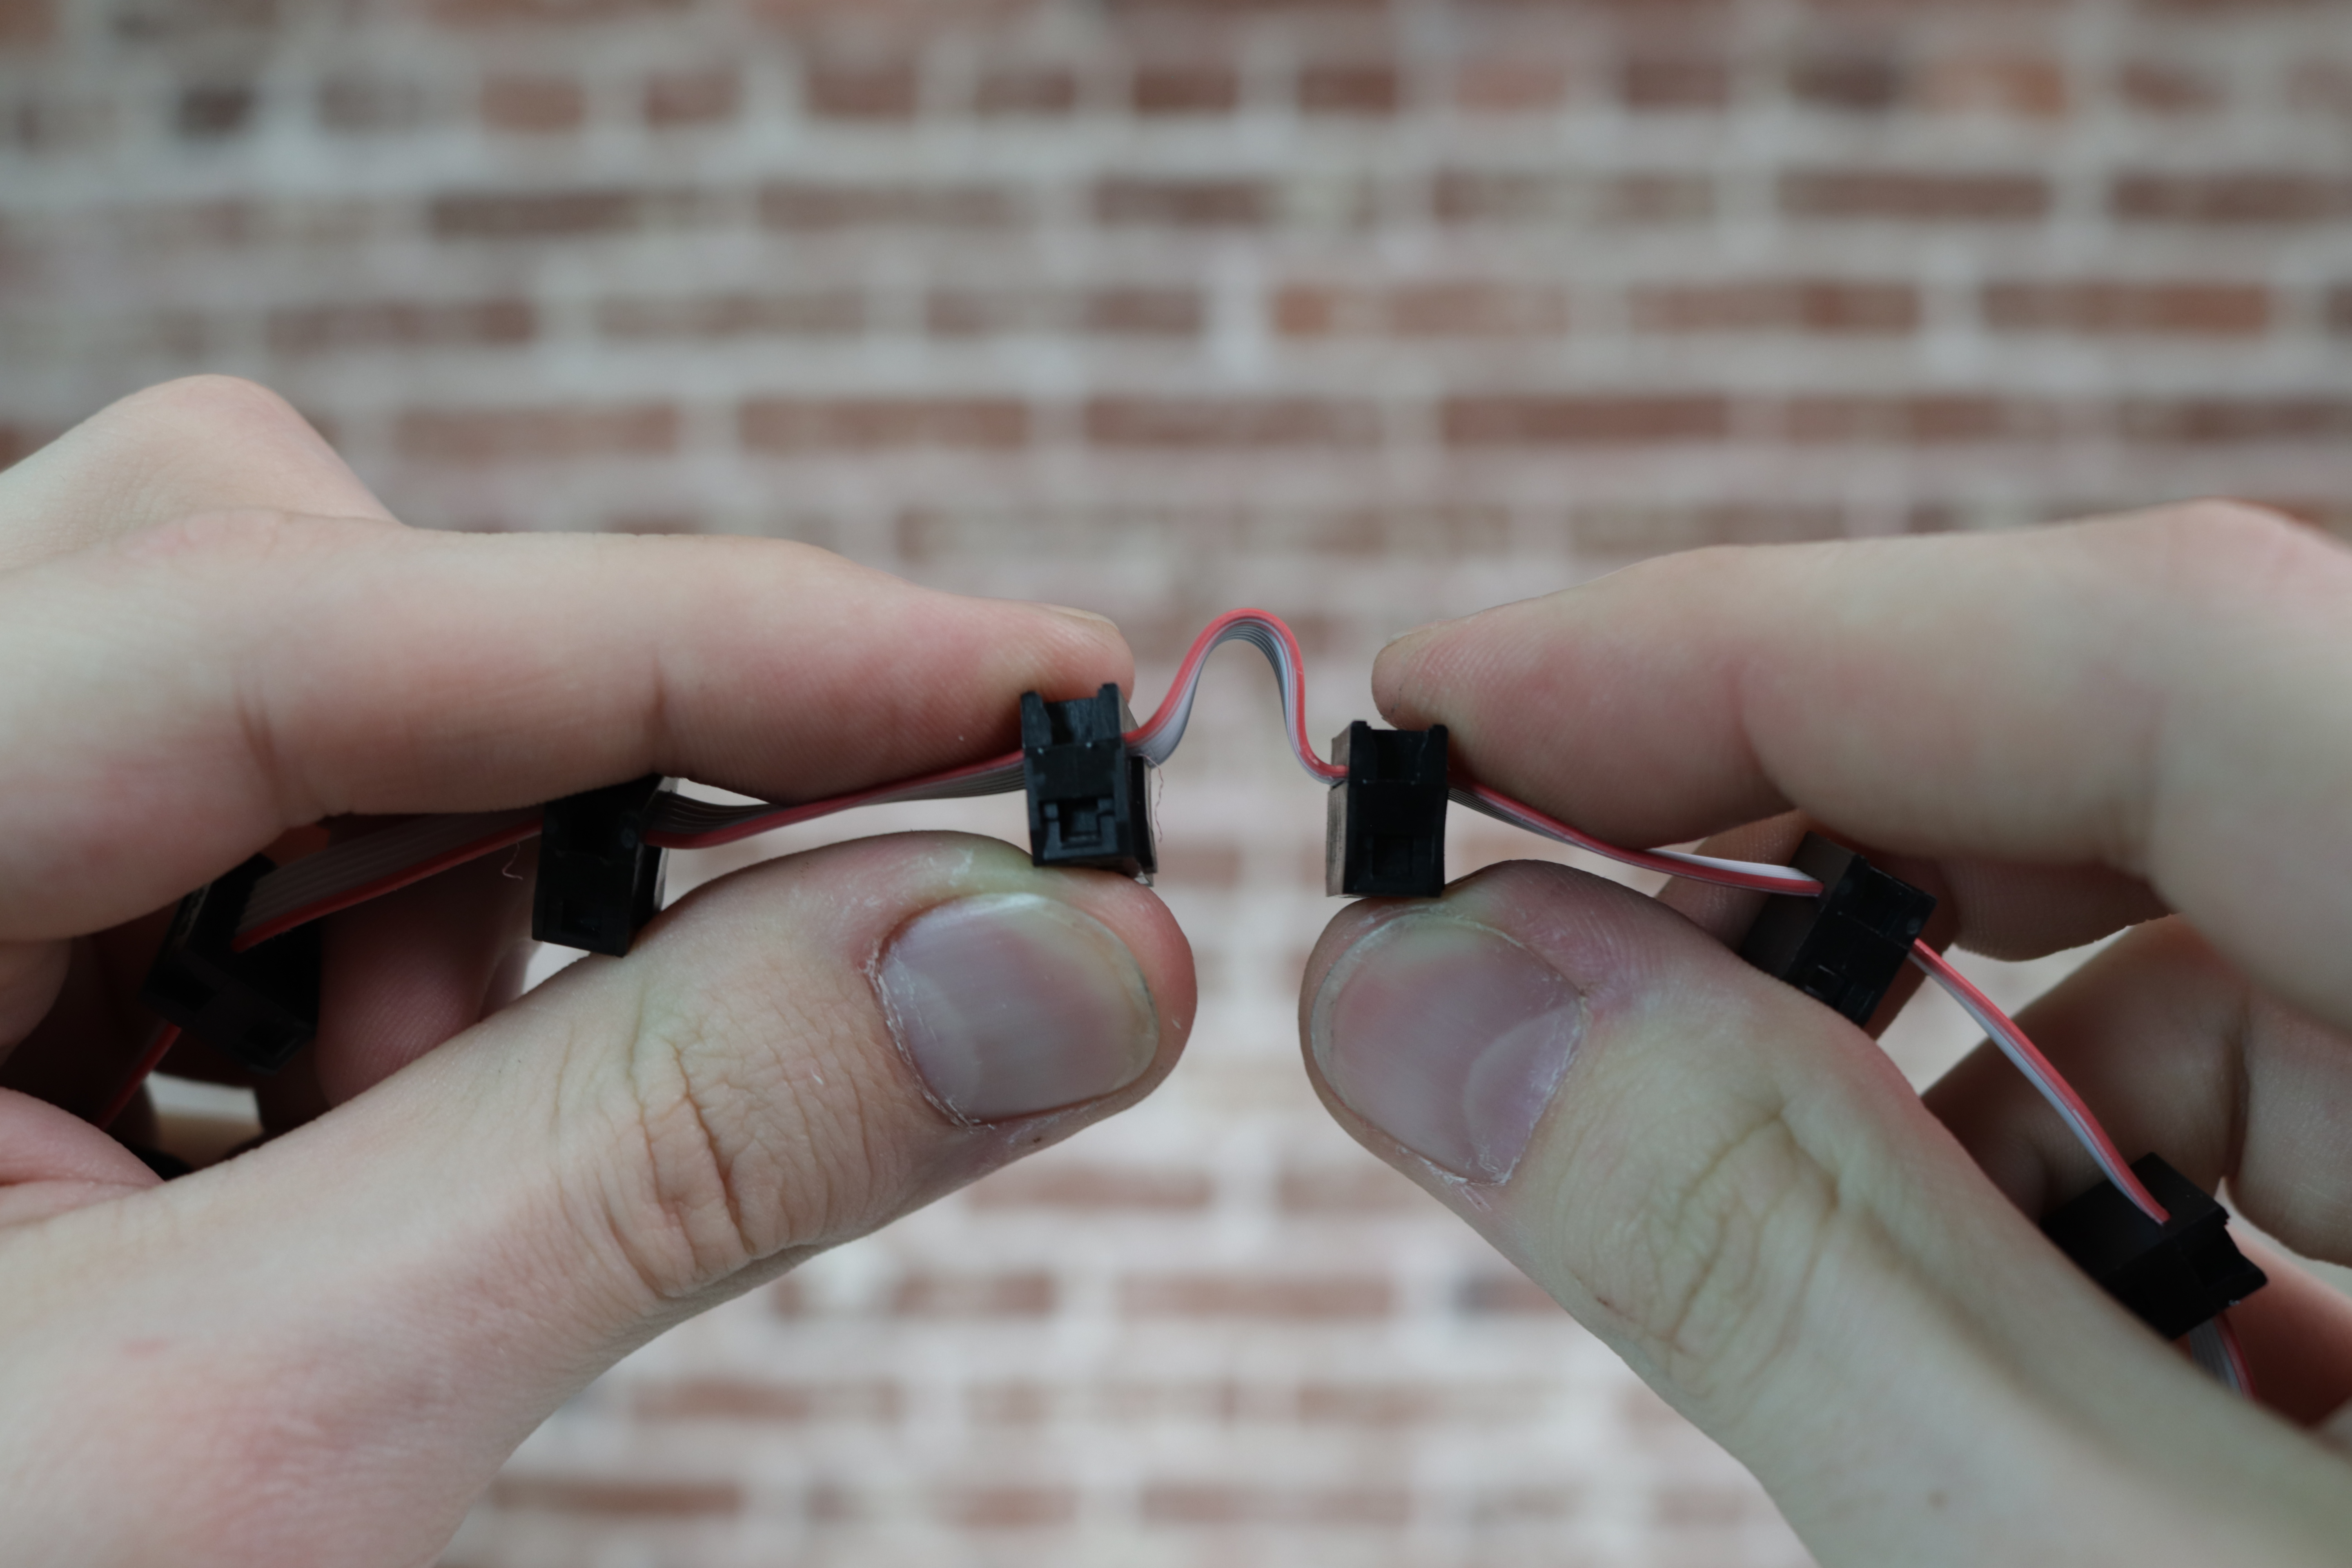 Bending the cable between two connectors